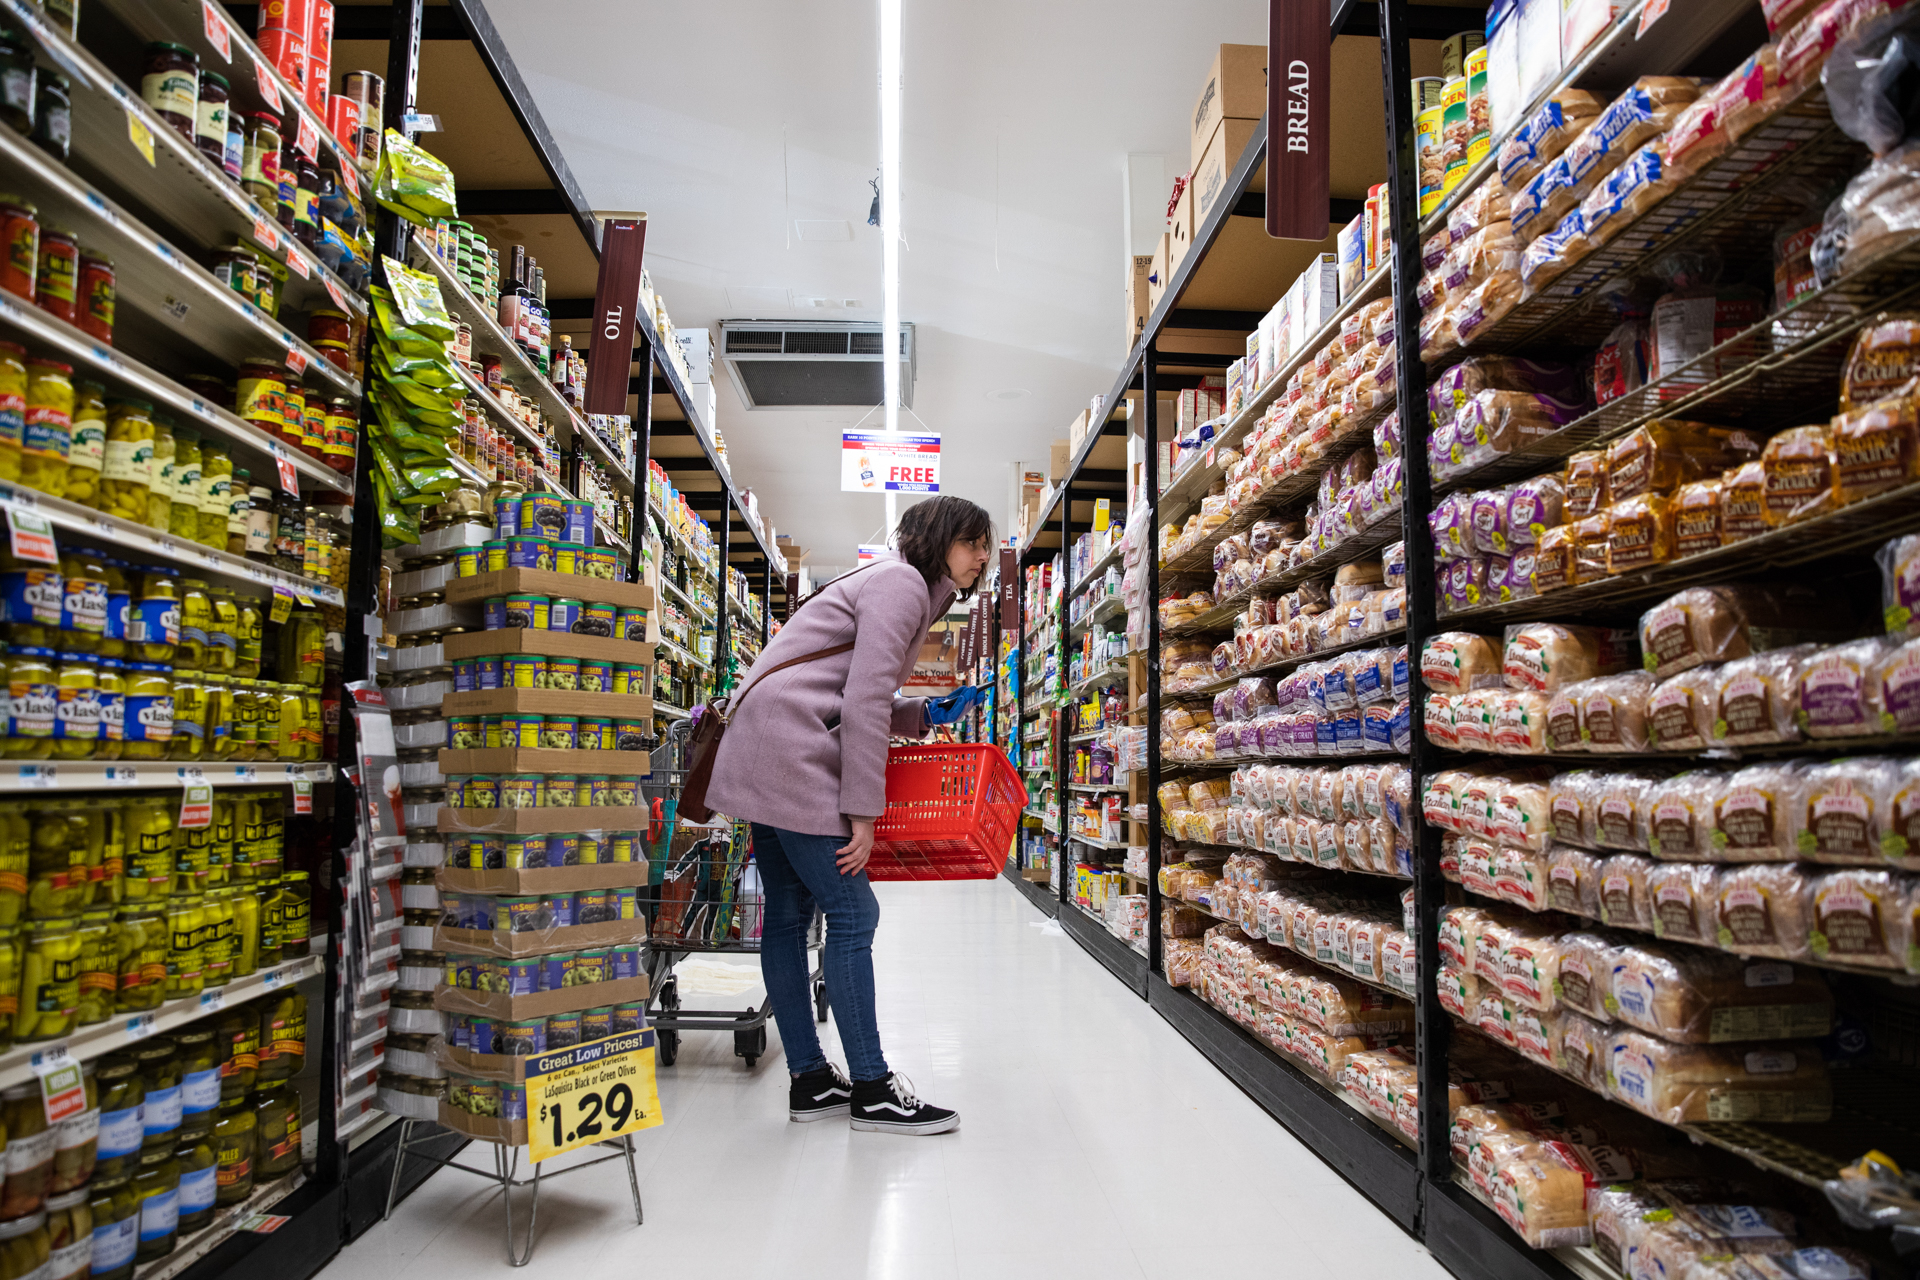 Nicole Mirra searches for the correct brands of foods for her recipients. Photo: Paul Frangipane/Brooklyn Eagle